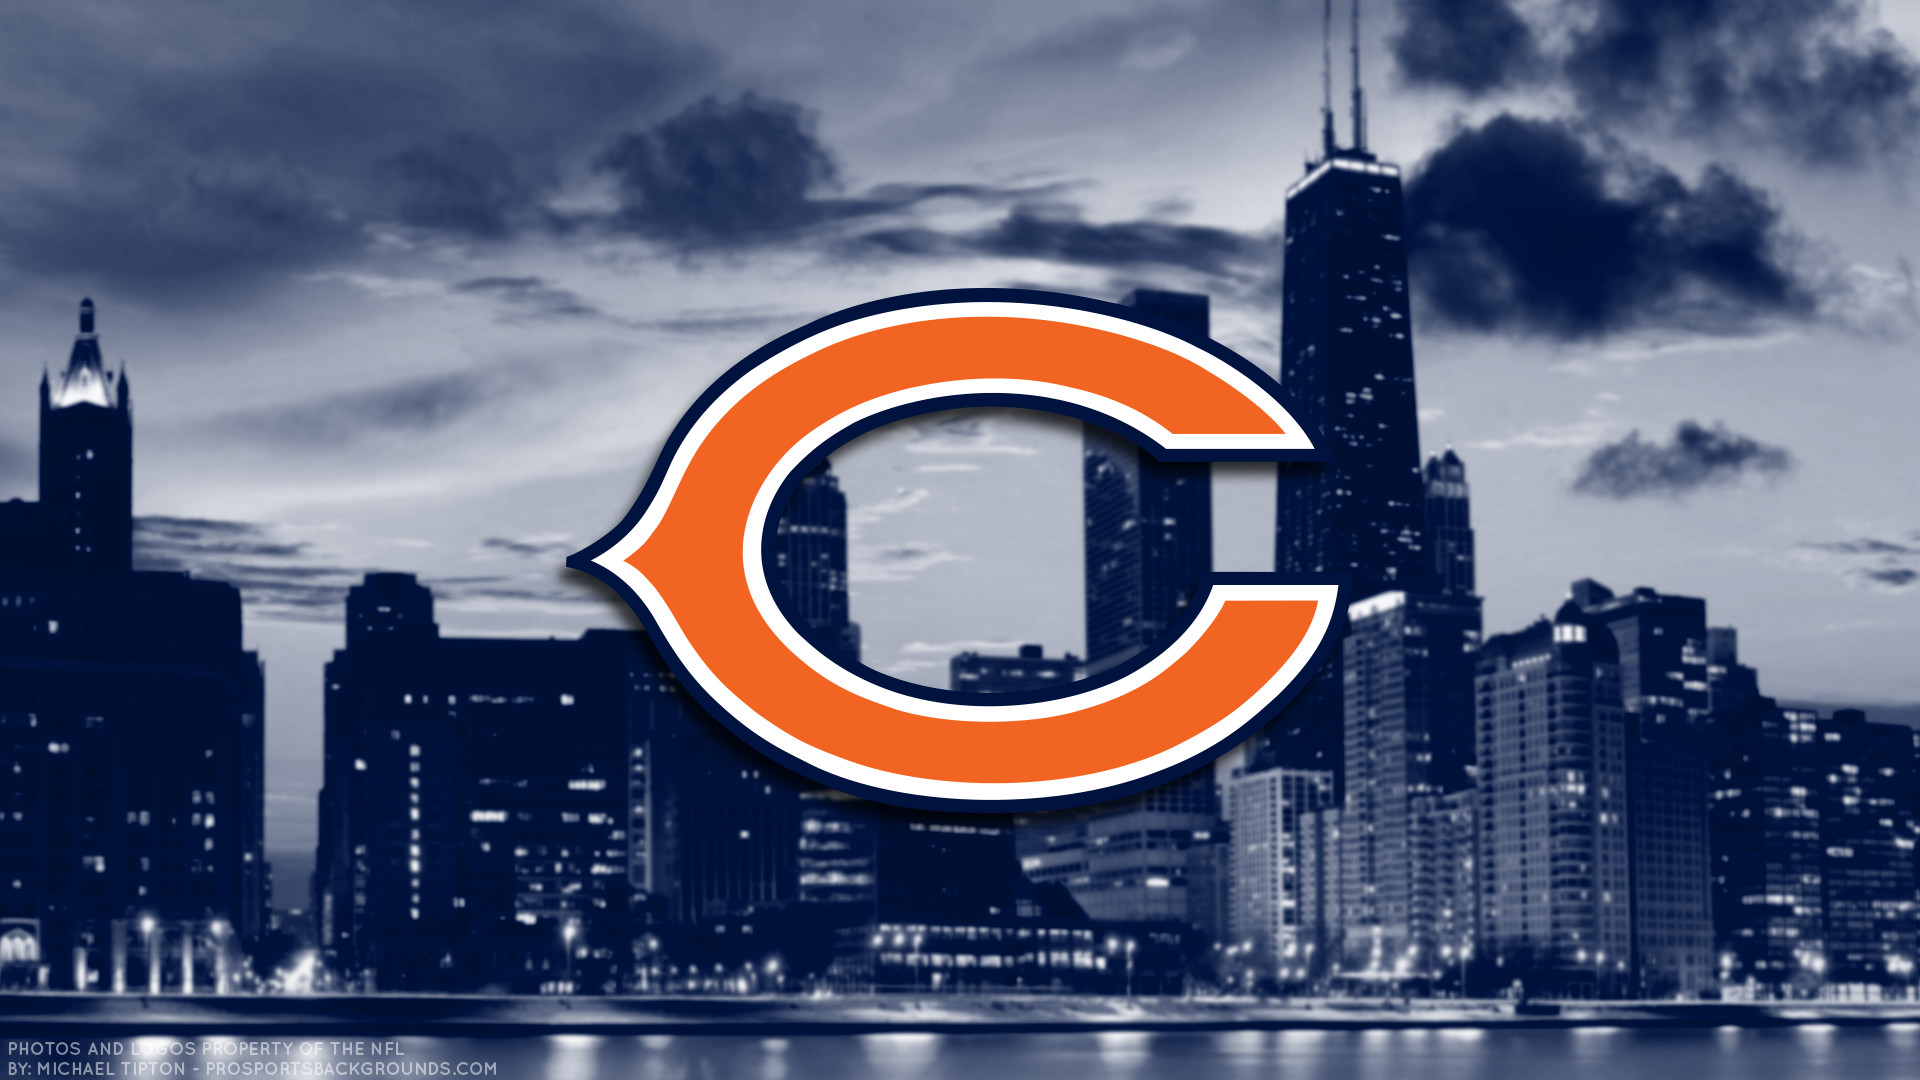 Chicago Bears wallpapers and Pictures download free HD Wallpapers Pinterest Hd wallpaper and Wallpaper